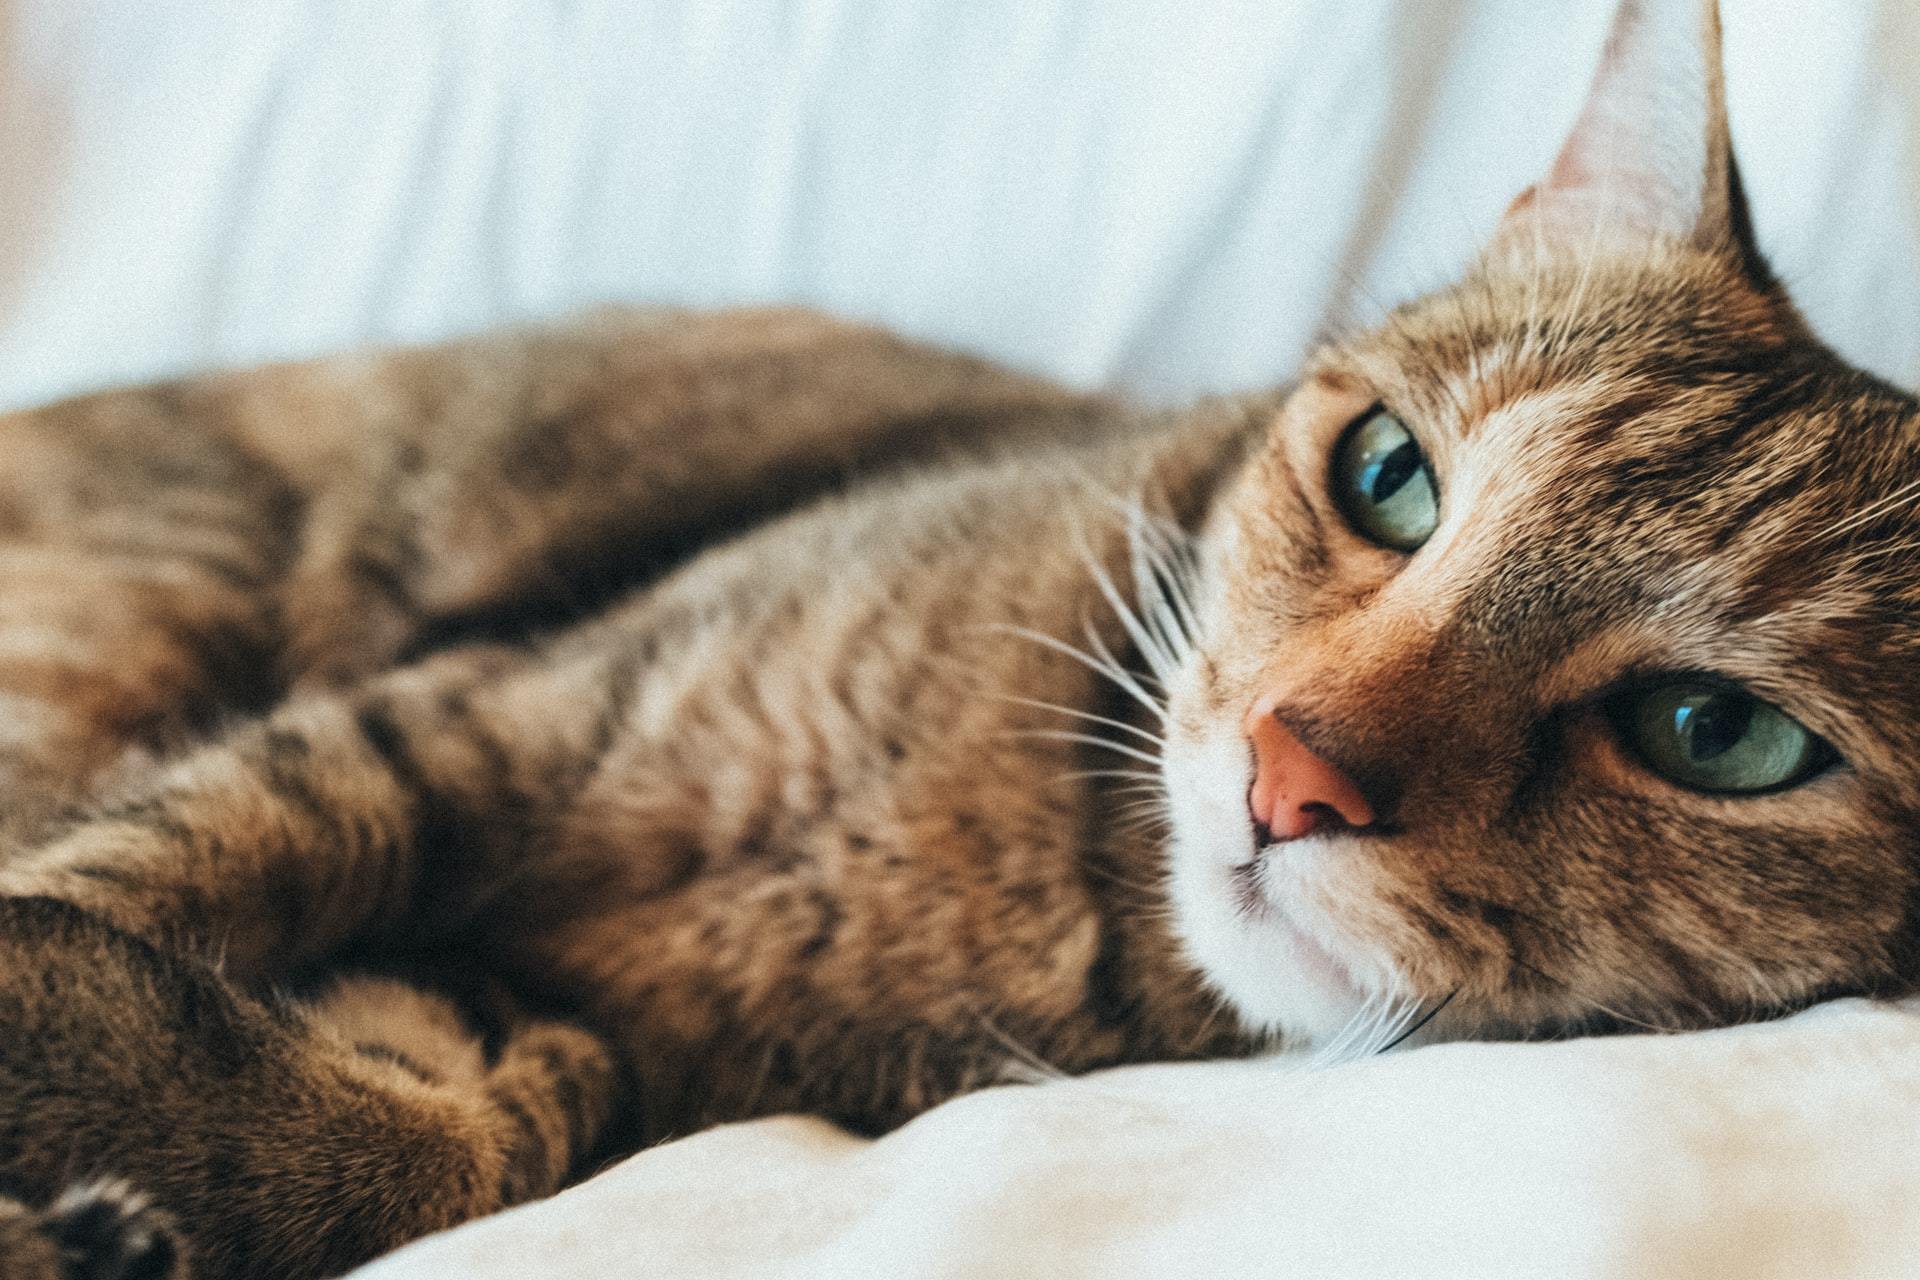 What is Feline Leukemia and how can it be prevented? FirstVet